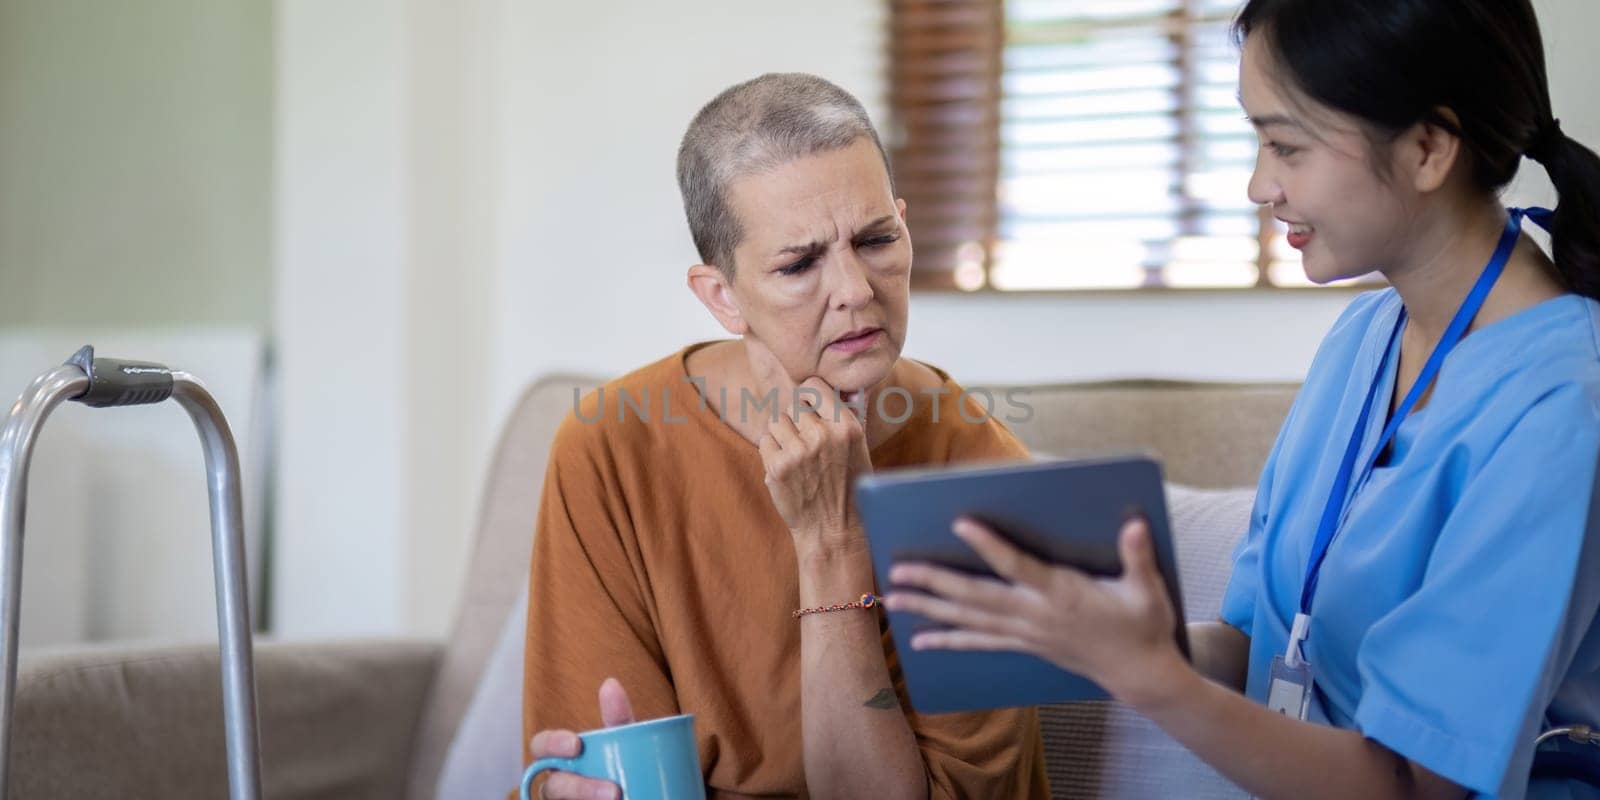 Asian caregiver discussing health information with an elderly woman at home, emphasizing elderly care and digital health management